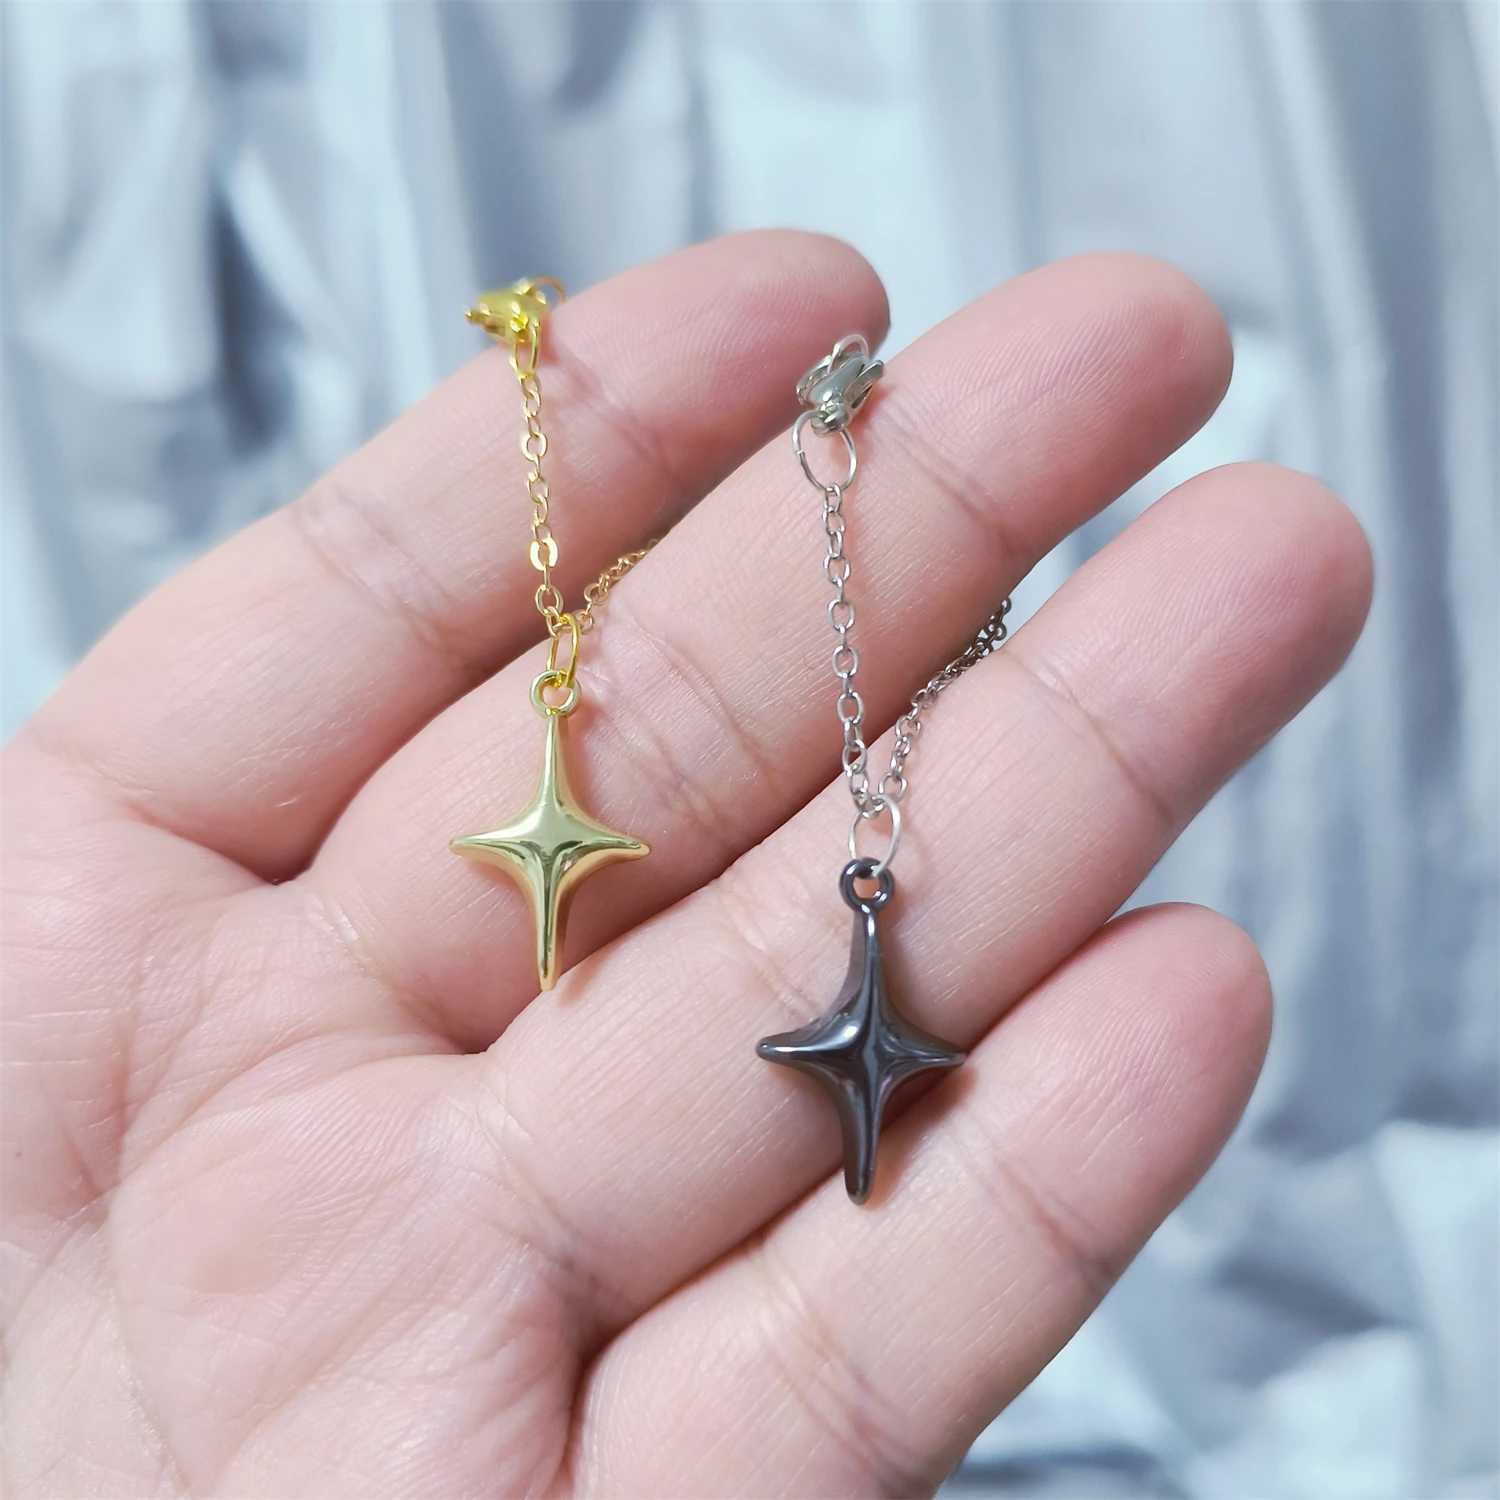 For BJD 1/6 Scale Blyth OB Doll Size Simulation Big Star Necklace Mini Tiny Accessories Decoration Alloy Prop Fashion new 1 64 scale c3 2020 diecast alloy toy car models 3 inches for collection gift